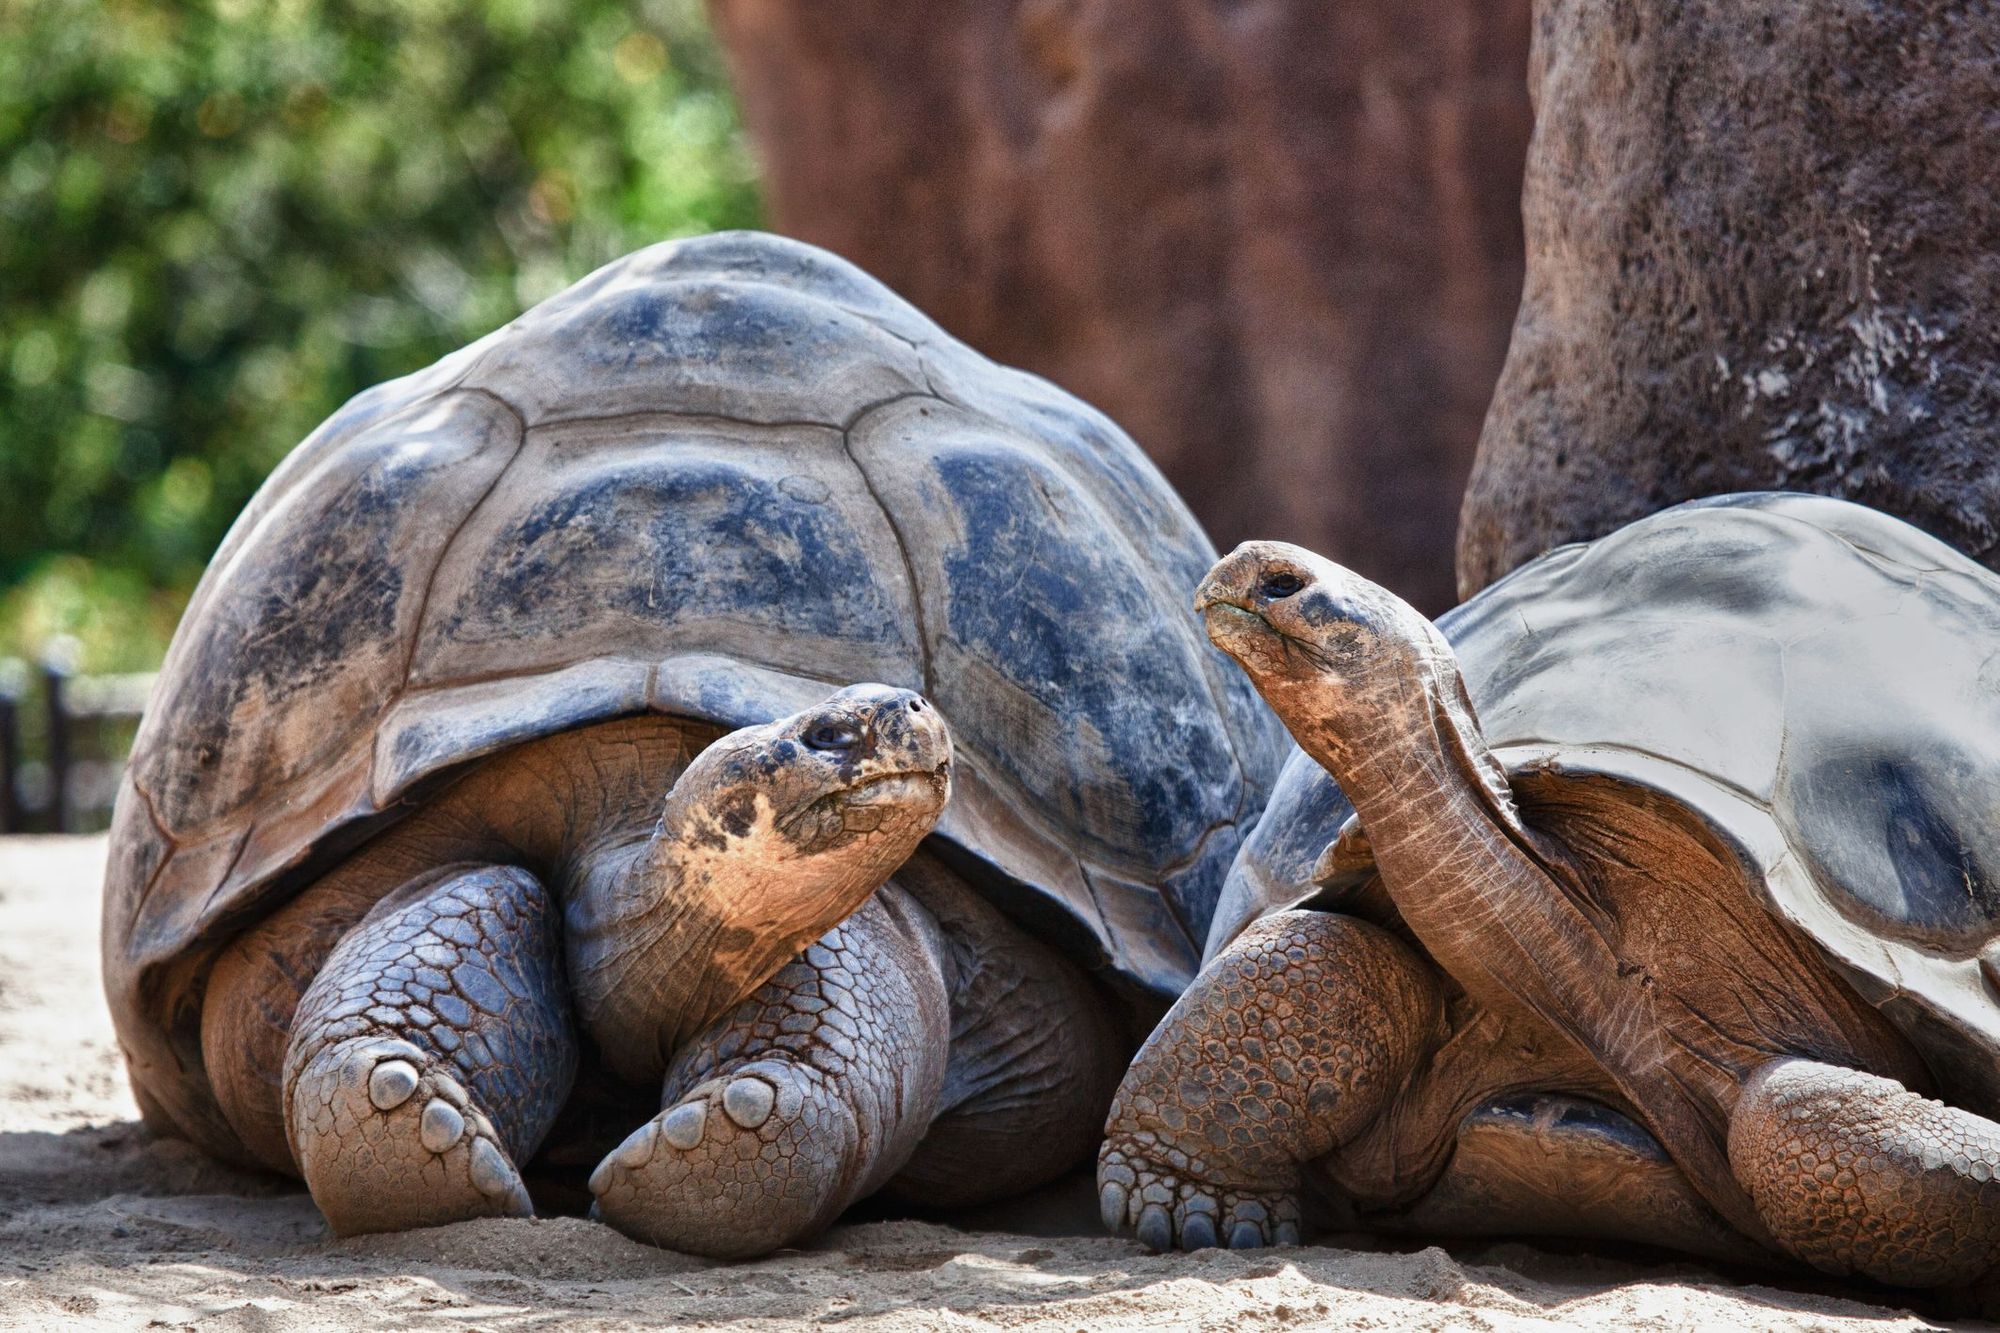 Two giant Galapagos tortoises having a conversation with each other.